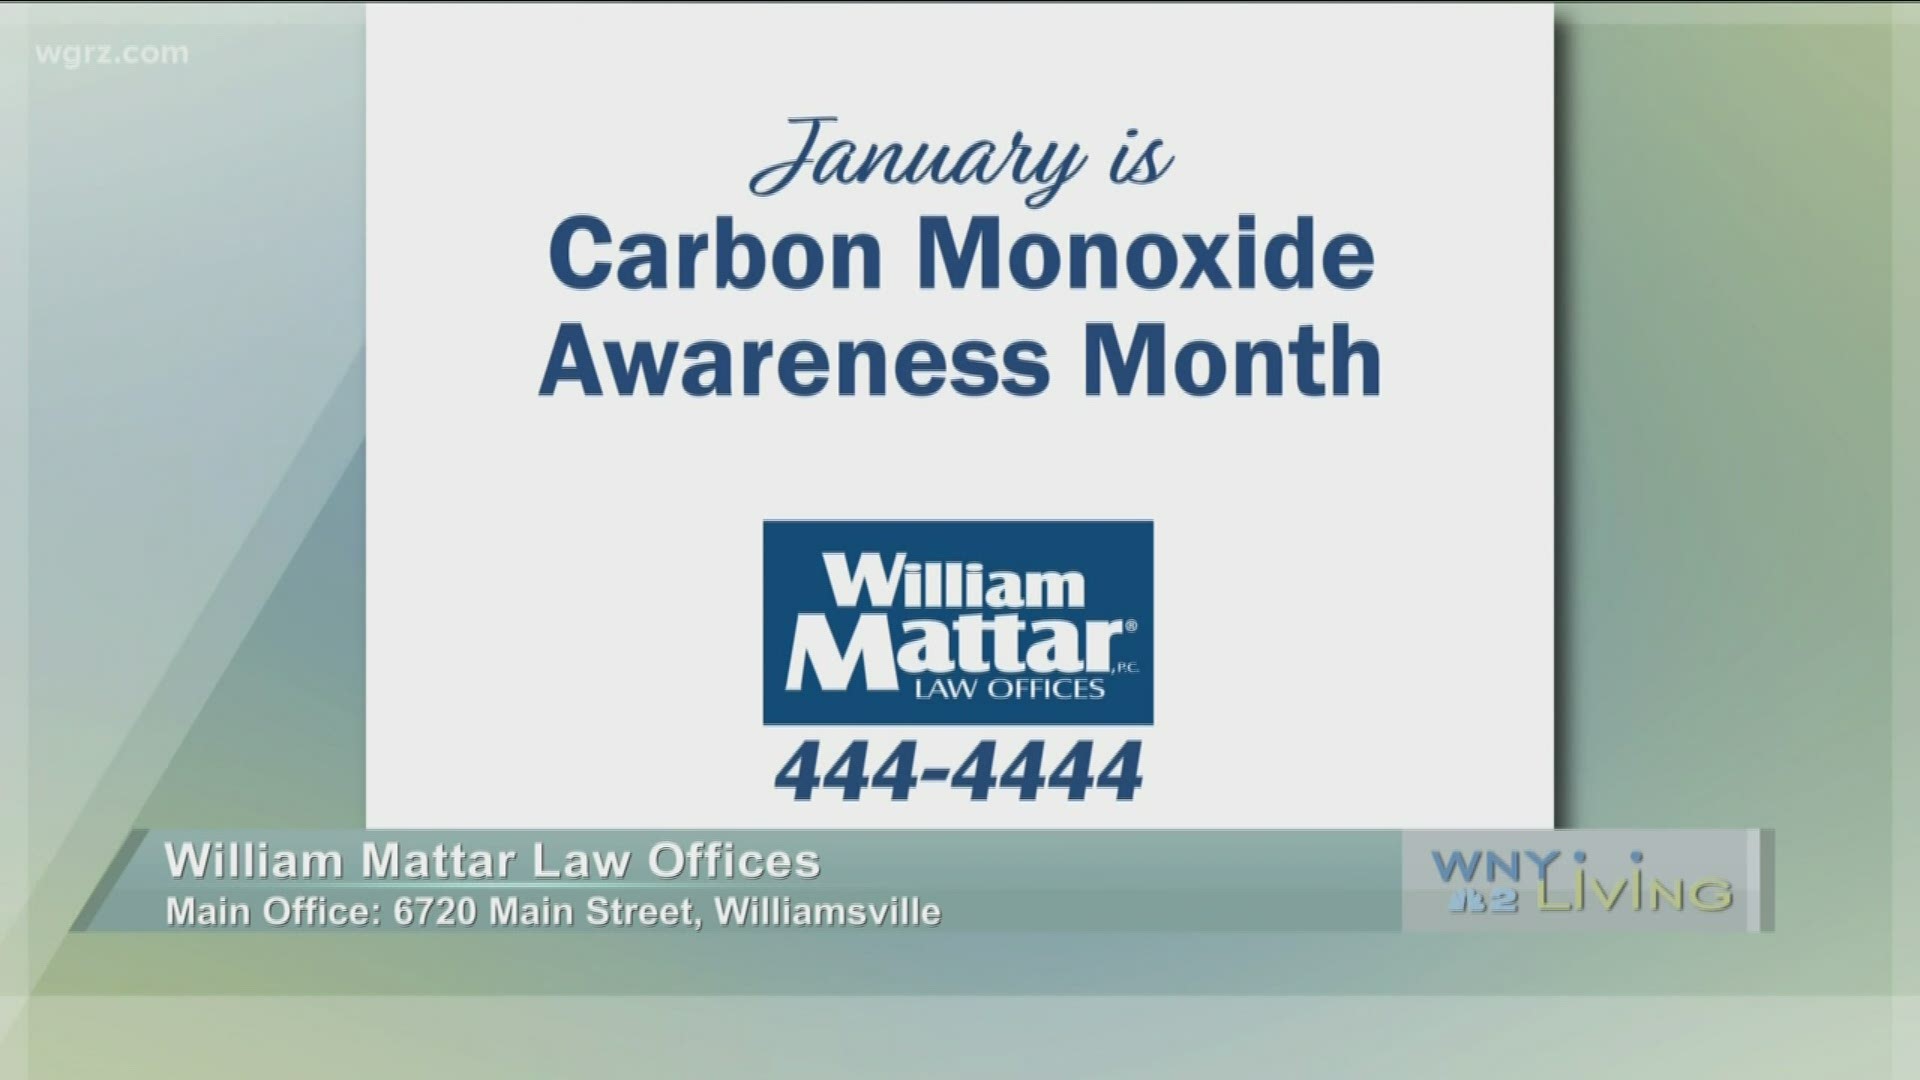 January 11 - William Mattar Law Offices (THIS VIDEO IS SPONSORED BY WILLIAM MATTAR LAW OFFICES)